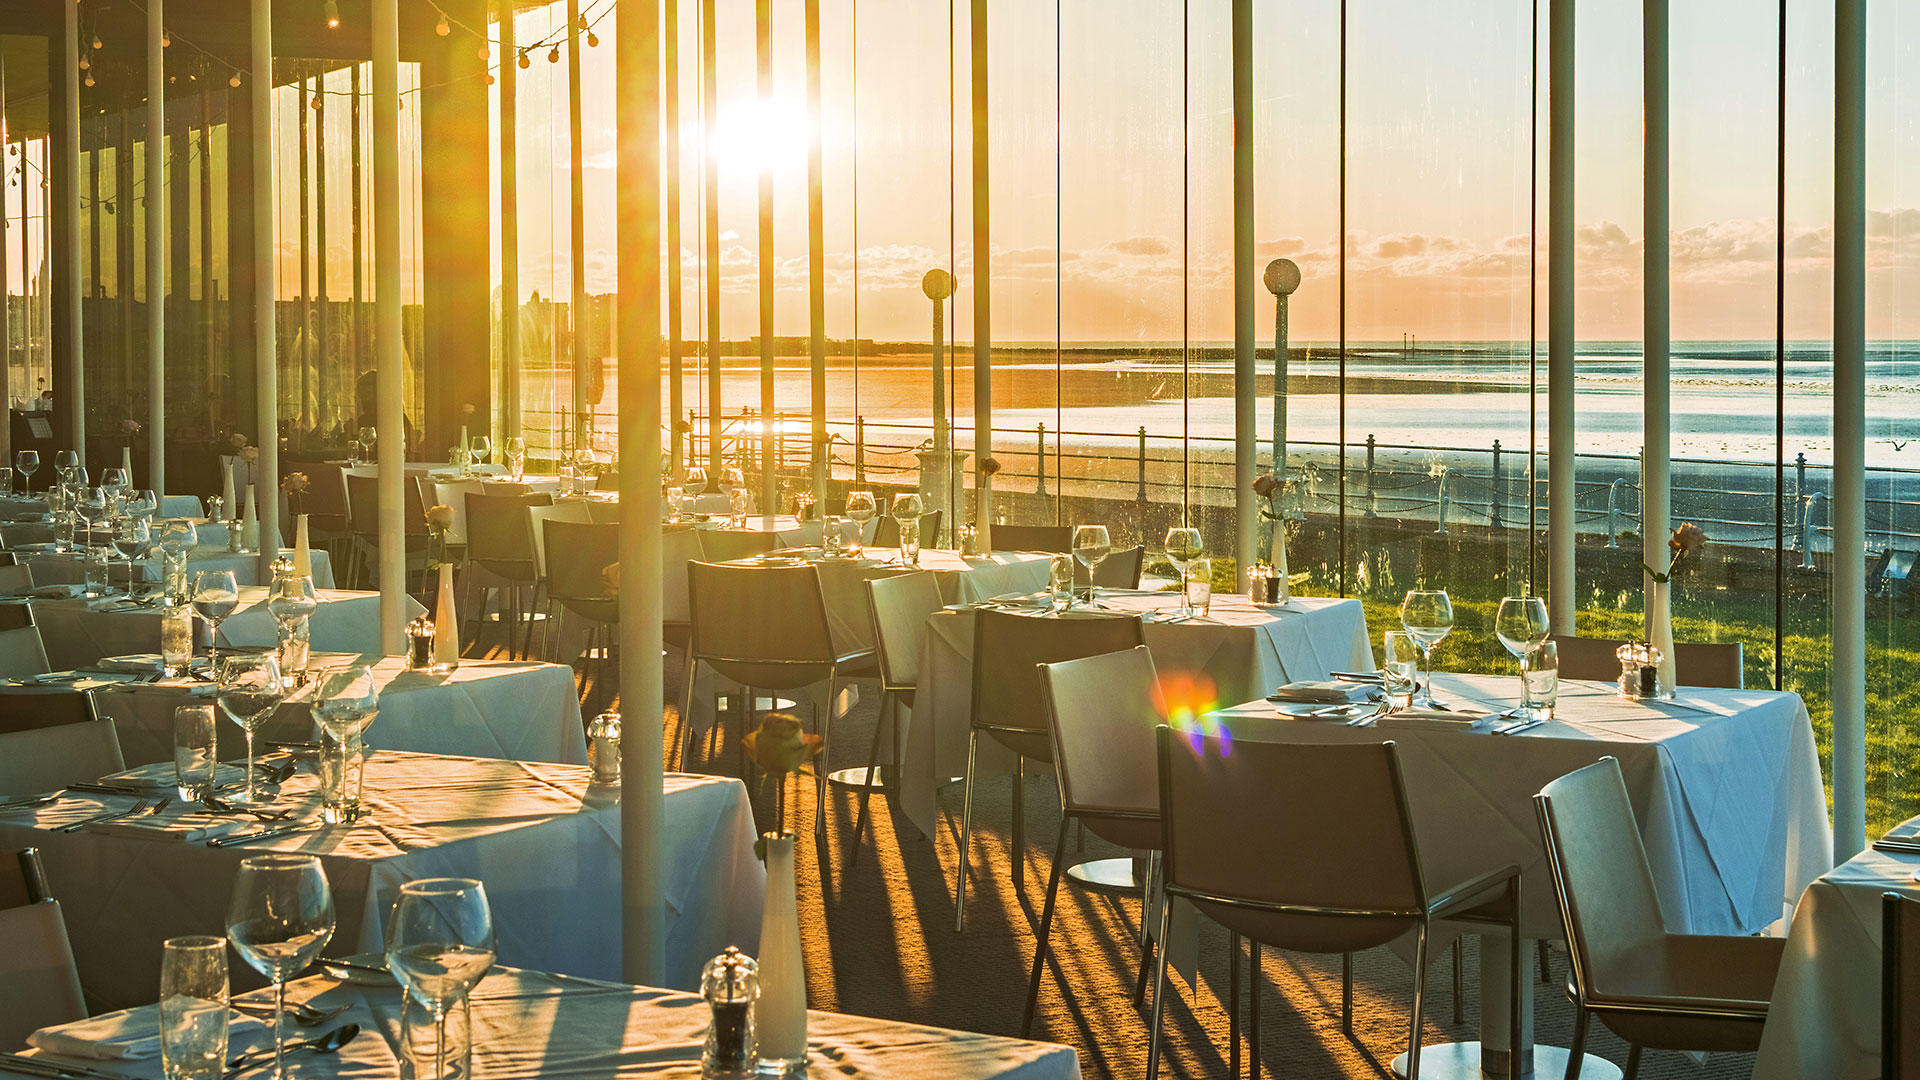 The Sun Terrace Restaurant overlooking the bay at sunset - The Midland, Morecombe